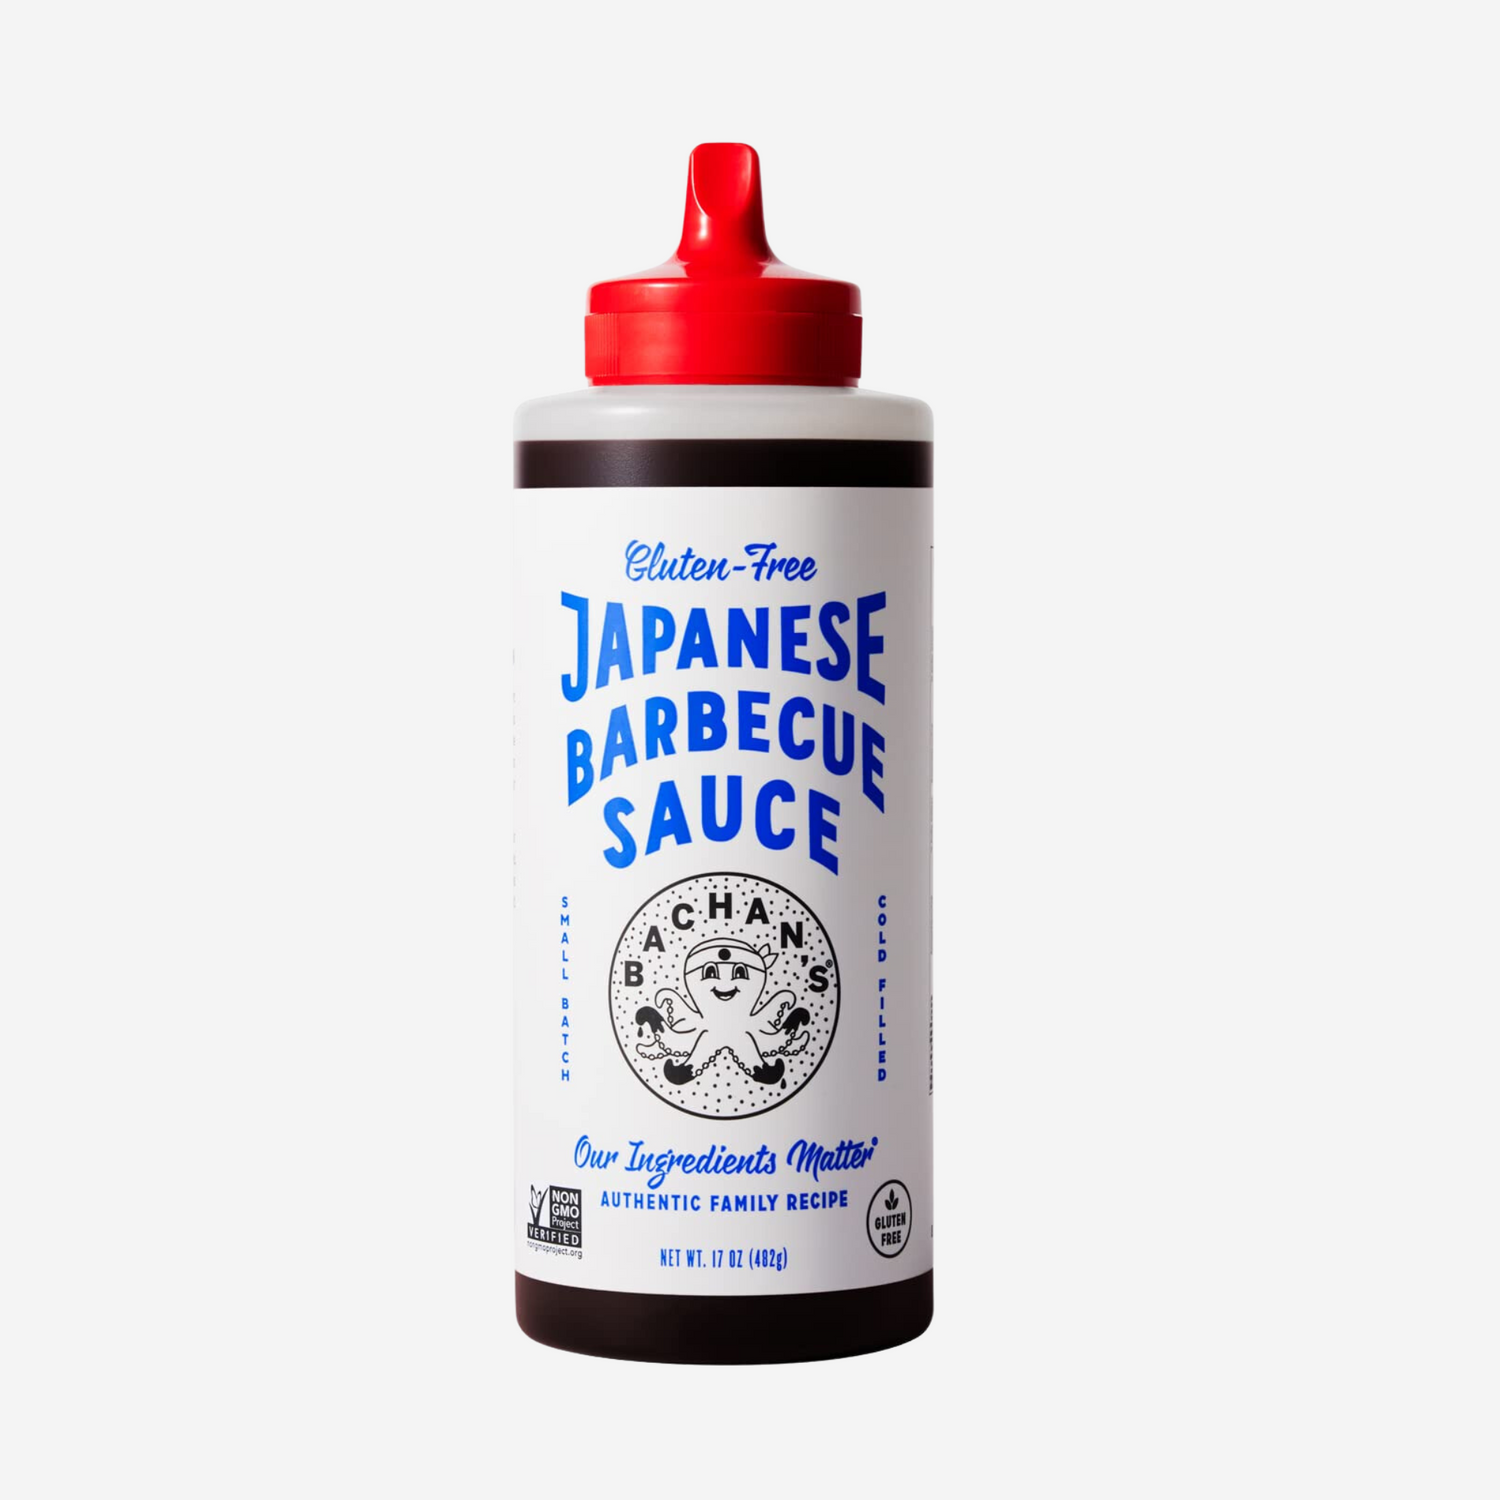 BACHAN'S GLUTEN-FREE JAPANESE BARBECUE SAUCE